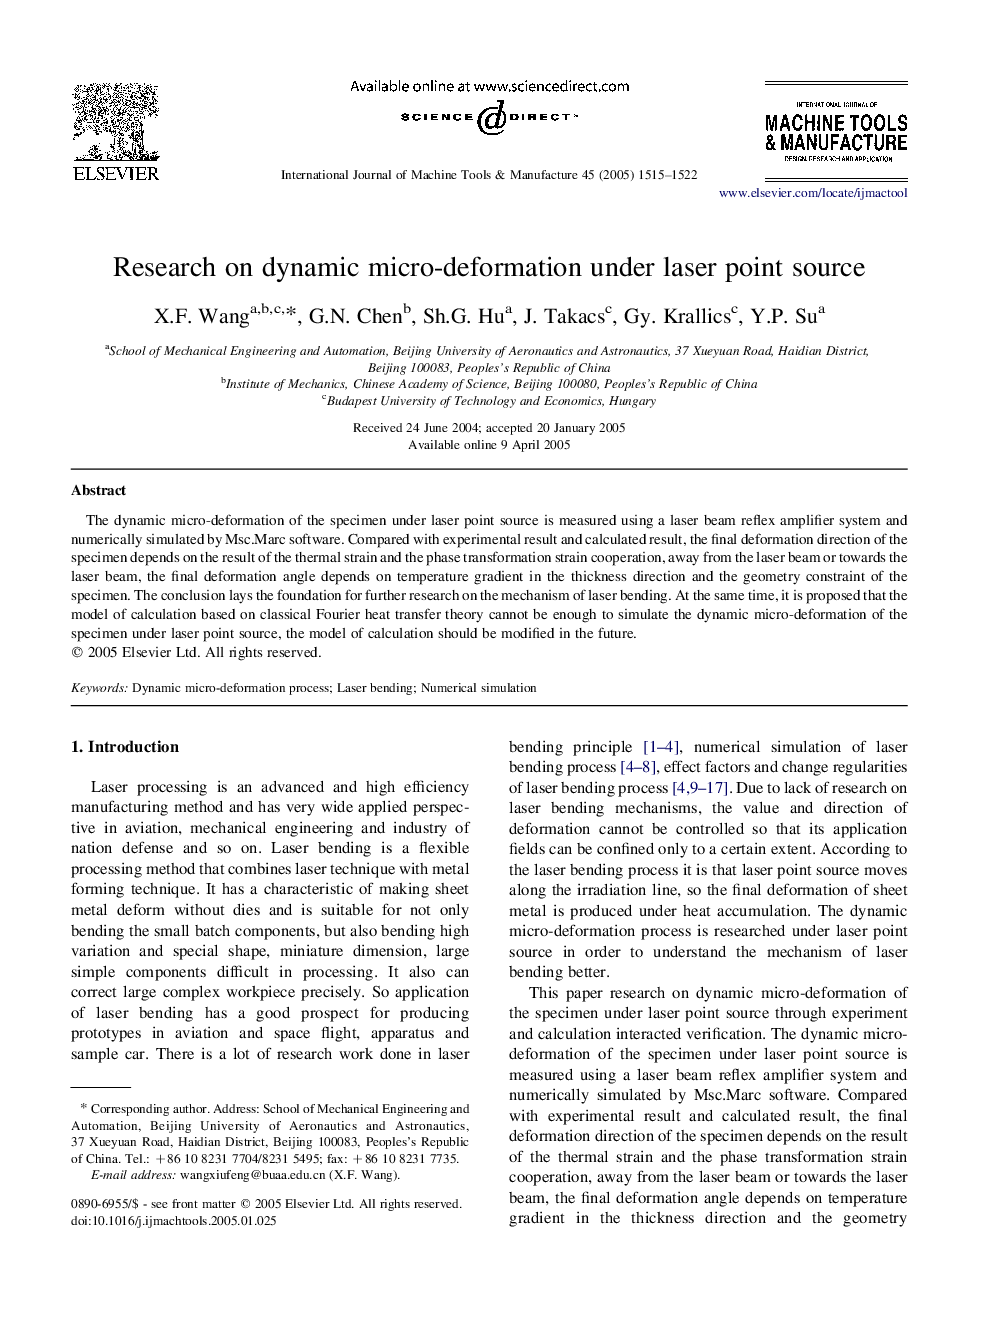 Research on dynamic micro-deformation under laser point source